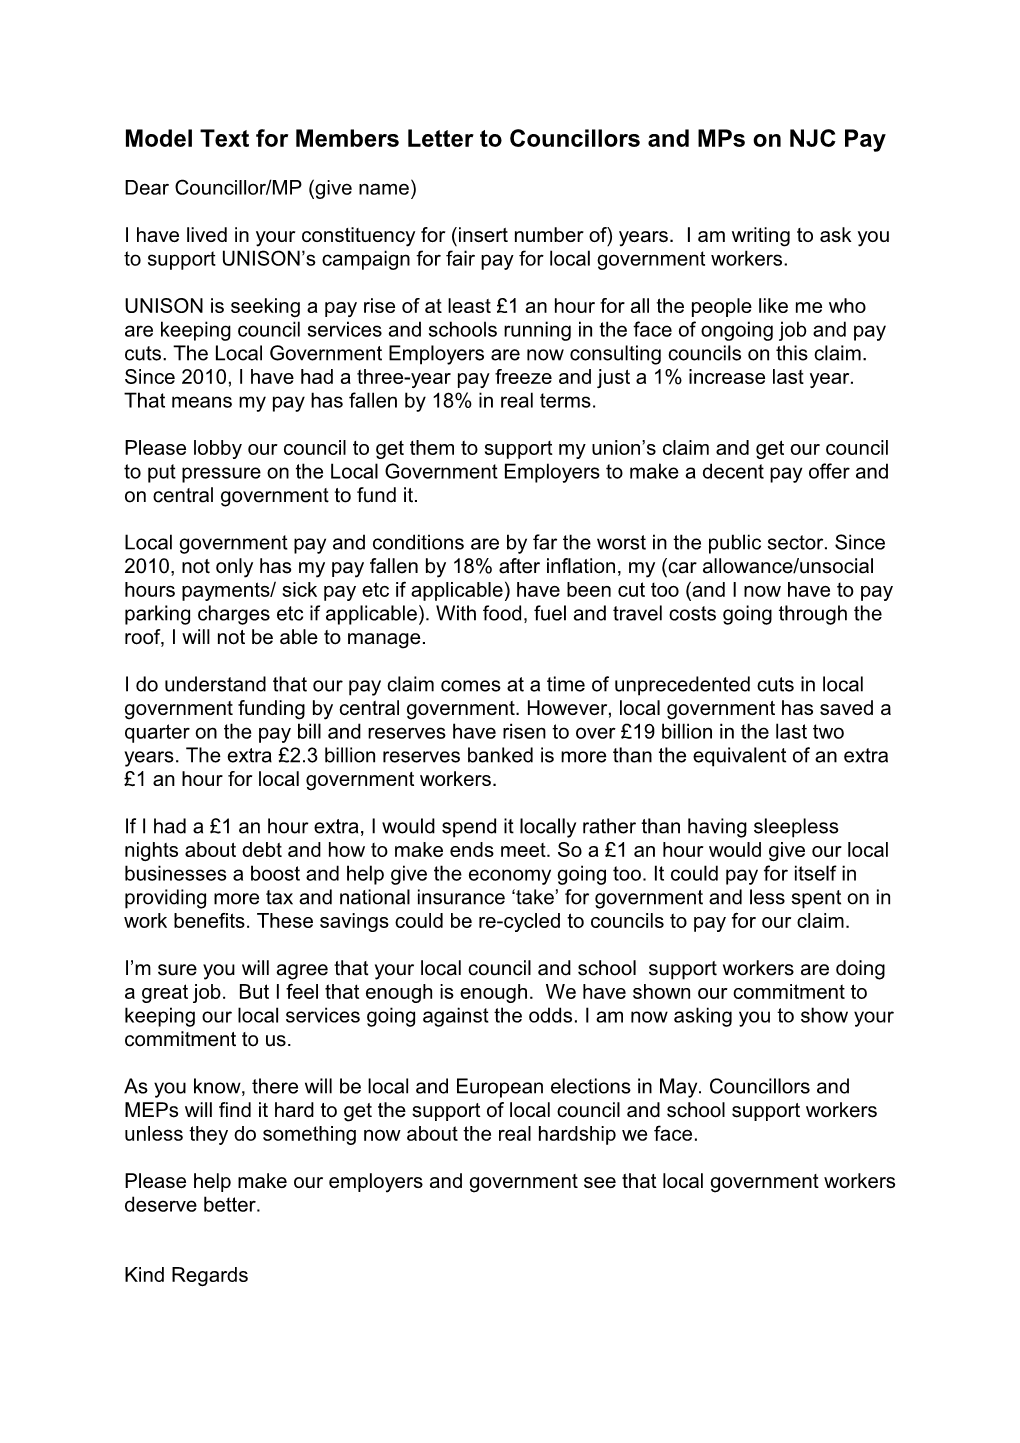 Members Letter to Councillors and Mps